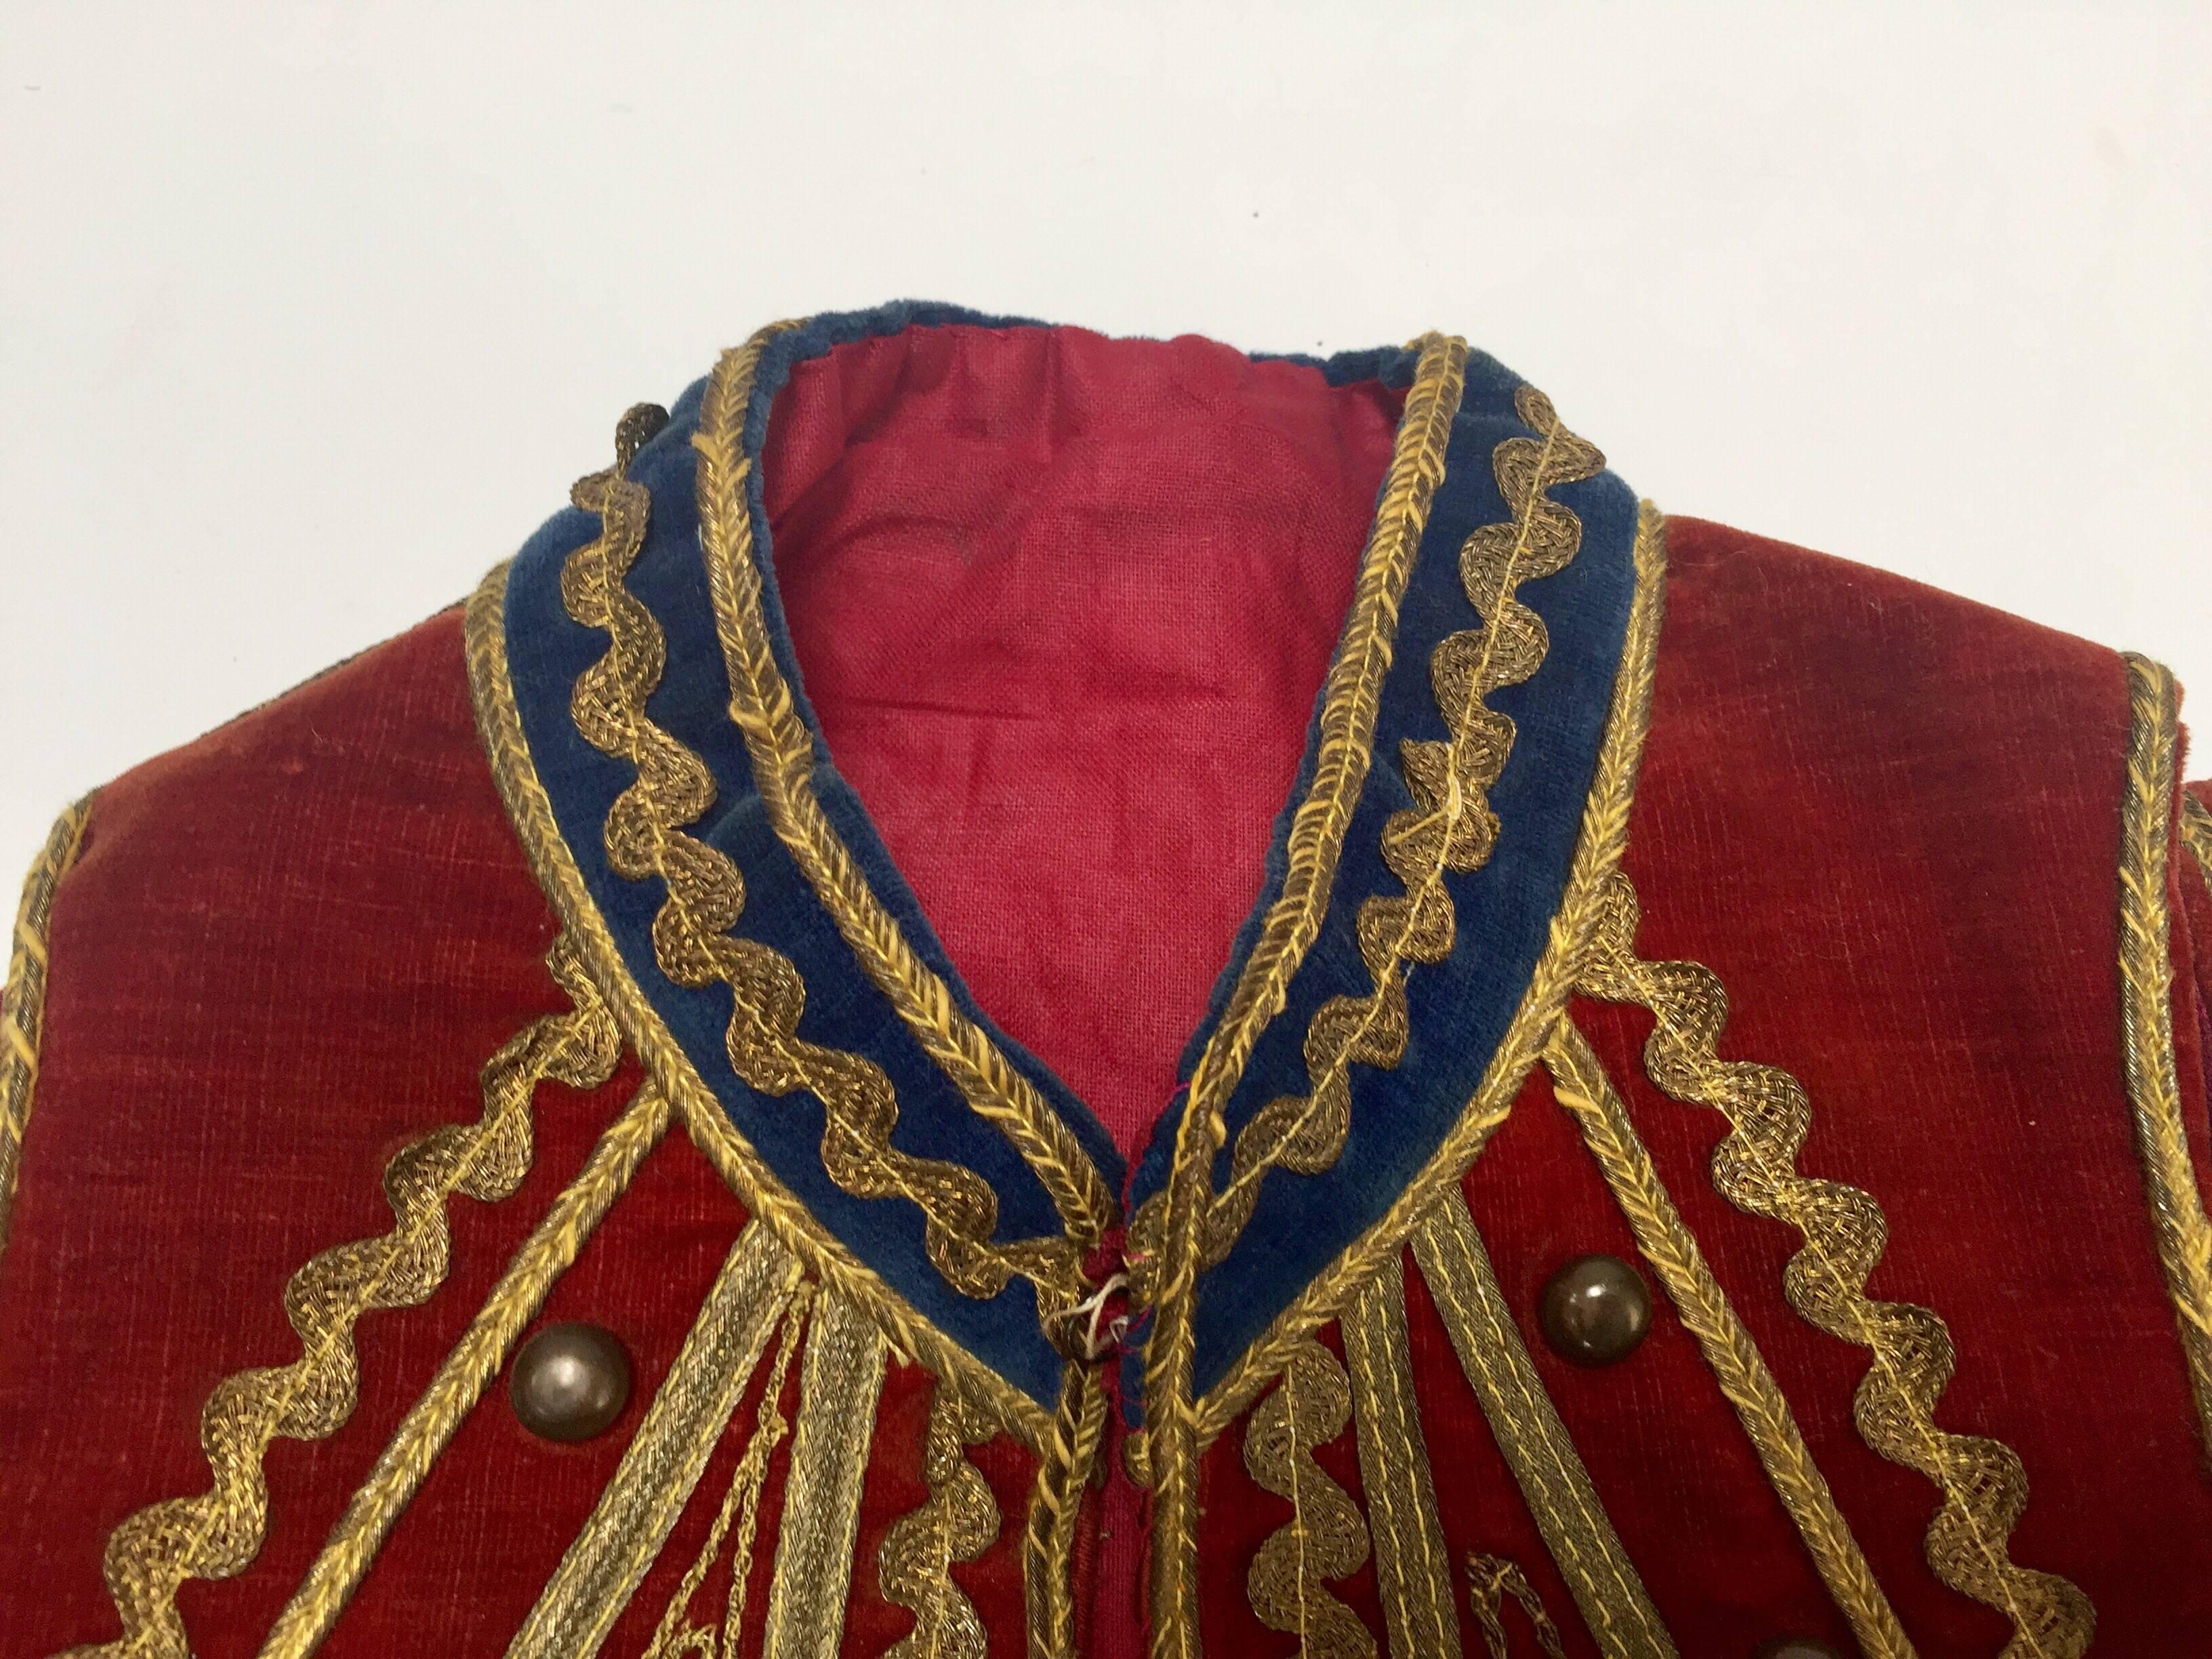 Antique Red Velvet Efe Zeybek Jacket Turkish Vest with Gold Embroidery In Good Condition For Sale In North Hollywood, CA